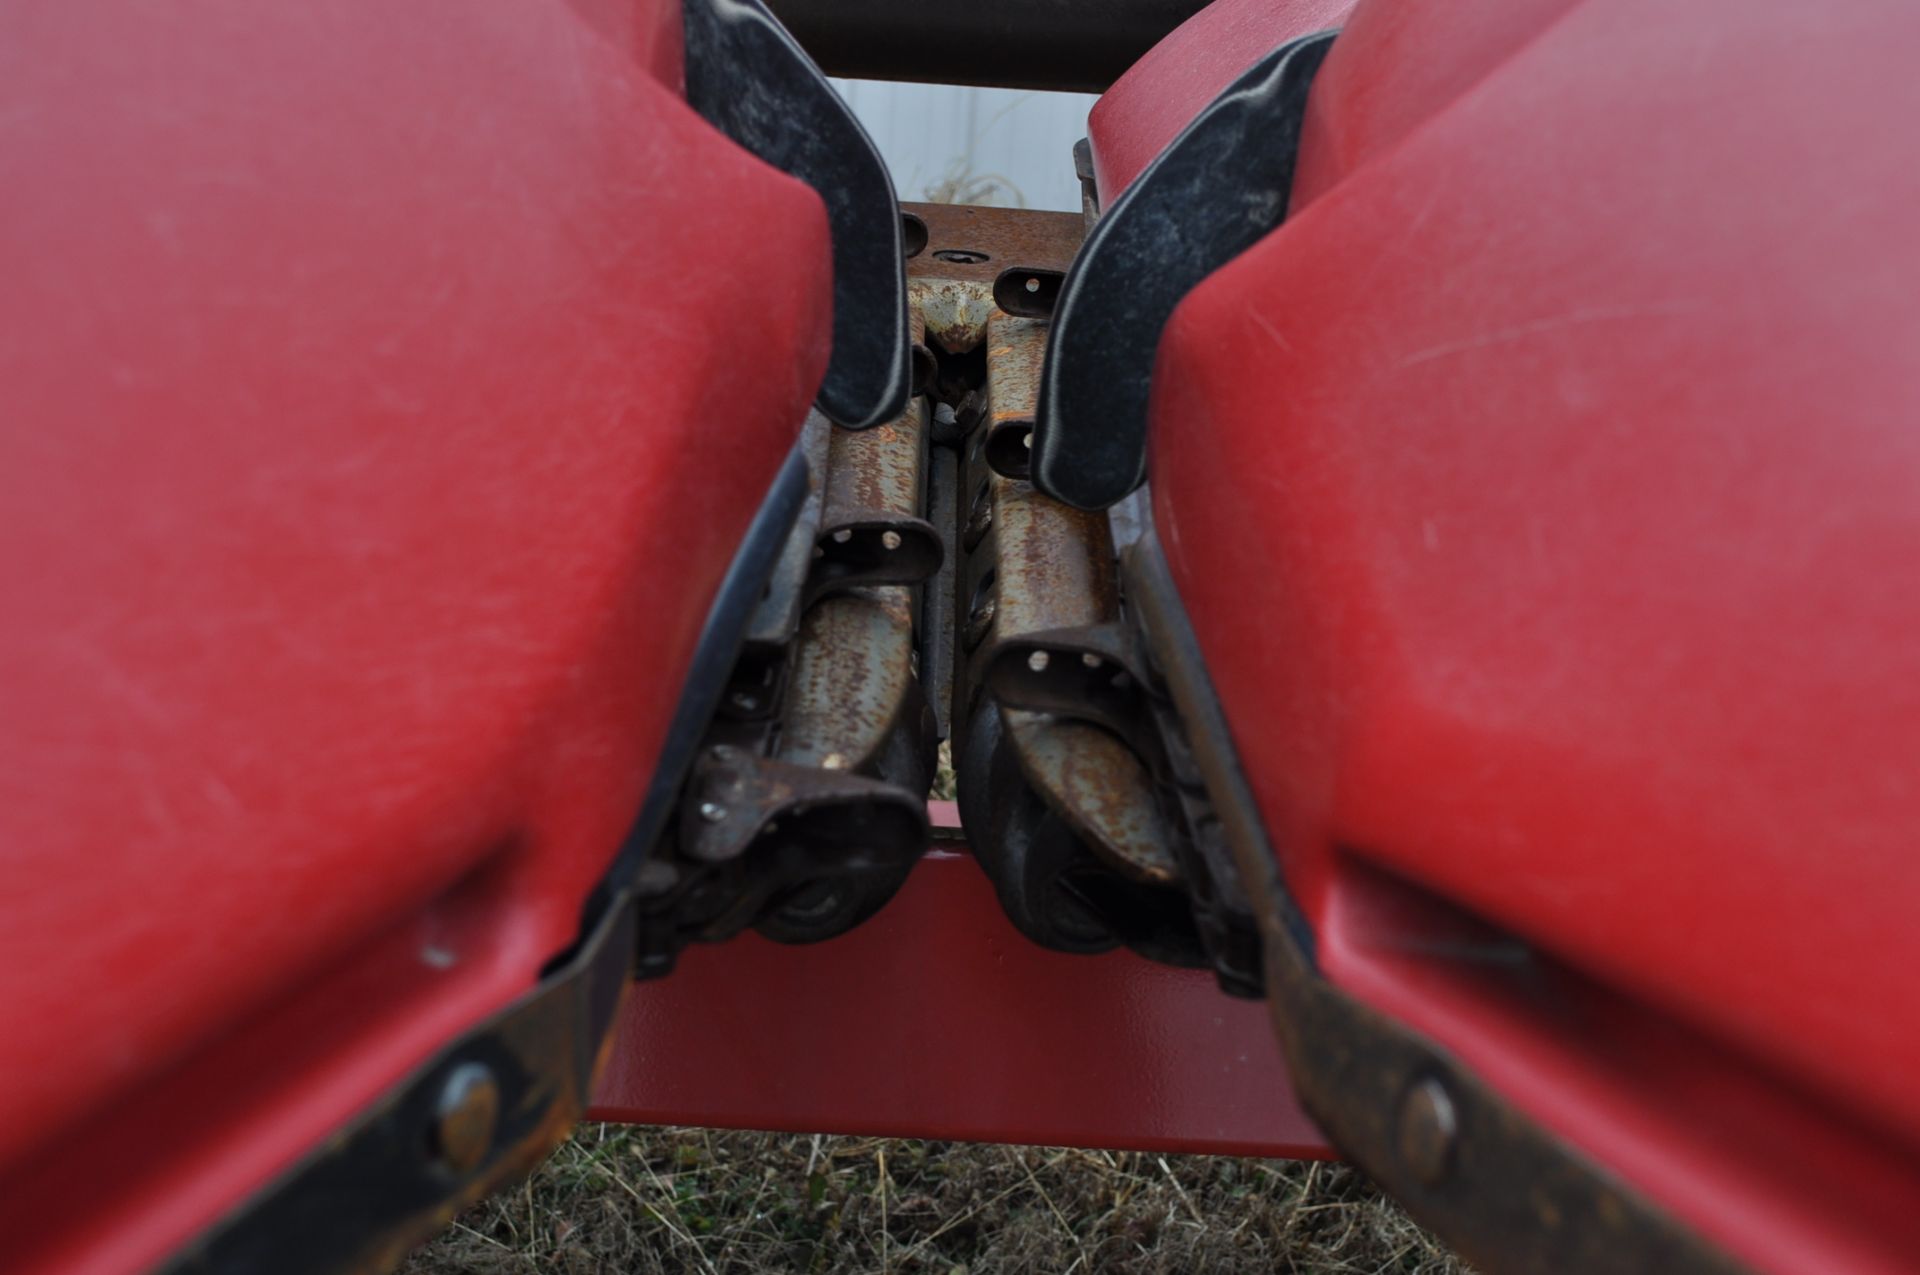 CASE IH 2208 Poly Corn Head, 8 rows x 30”, hyd deck plates, knife rolls, poly, 3 header height - Image 12 of 16